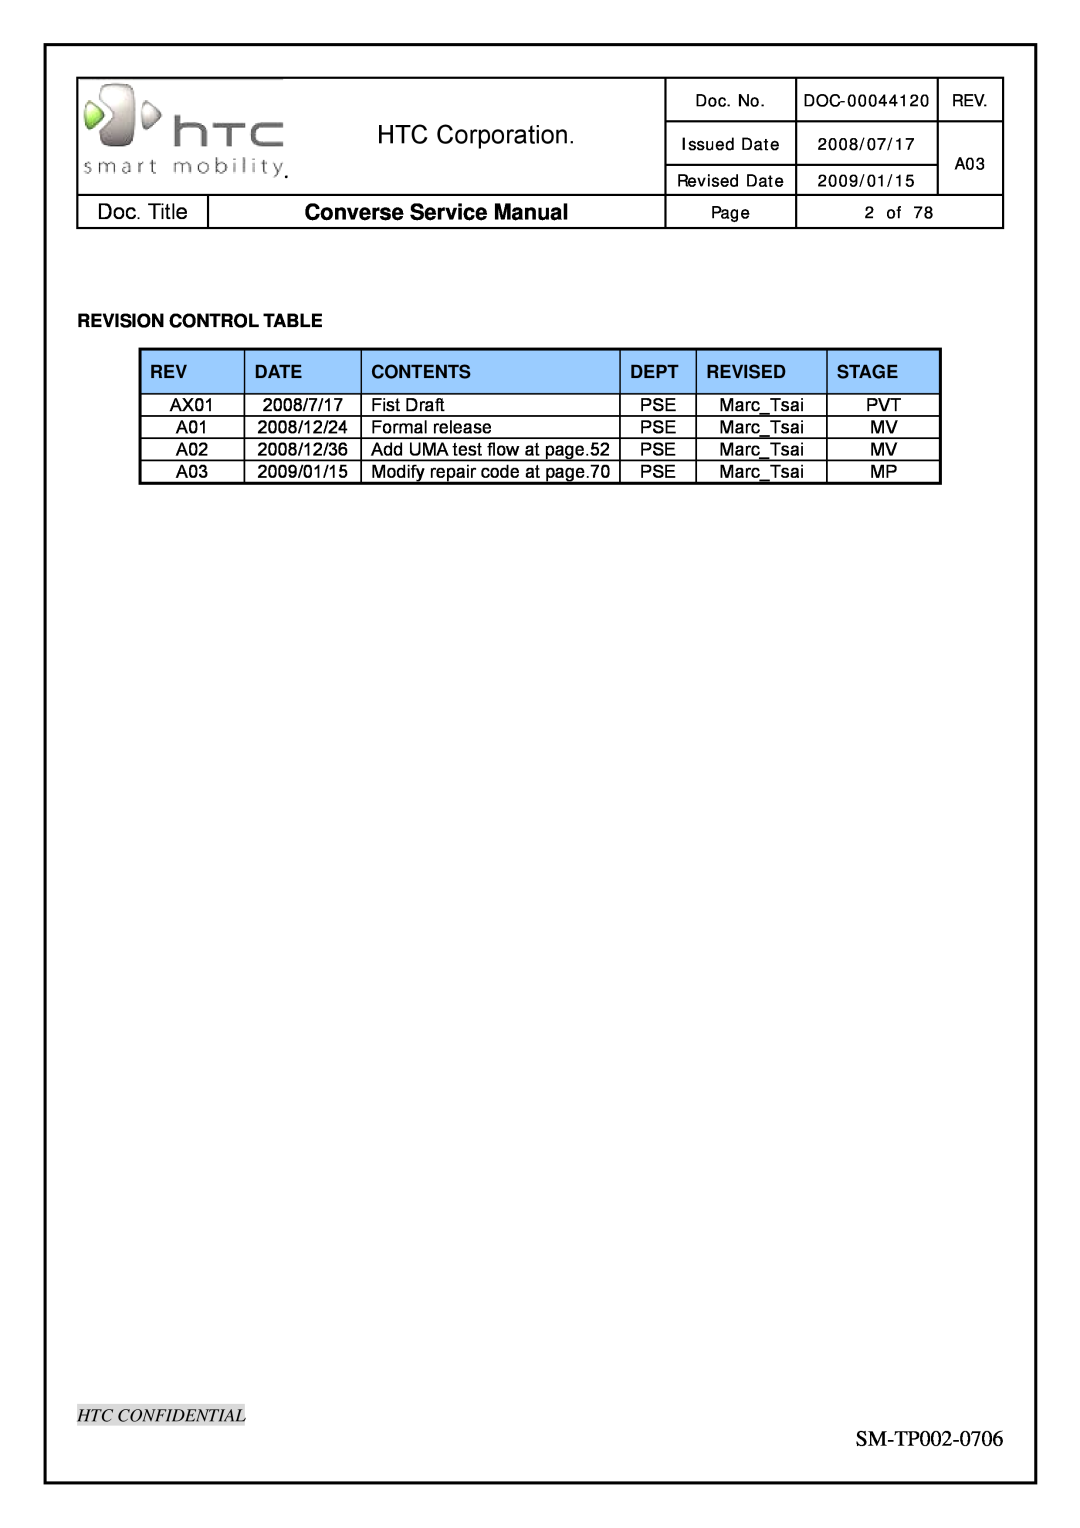 HTC SM-TP002-0706 HTC Corporation, Converse Service Manual, Revision Control Table, Date, Contents, Dept, Revised, Stage 